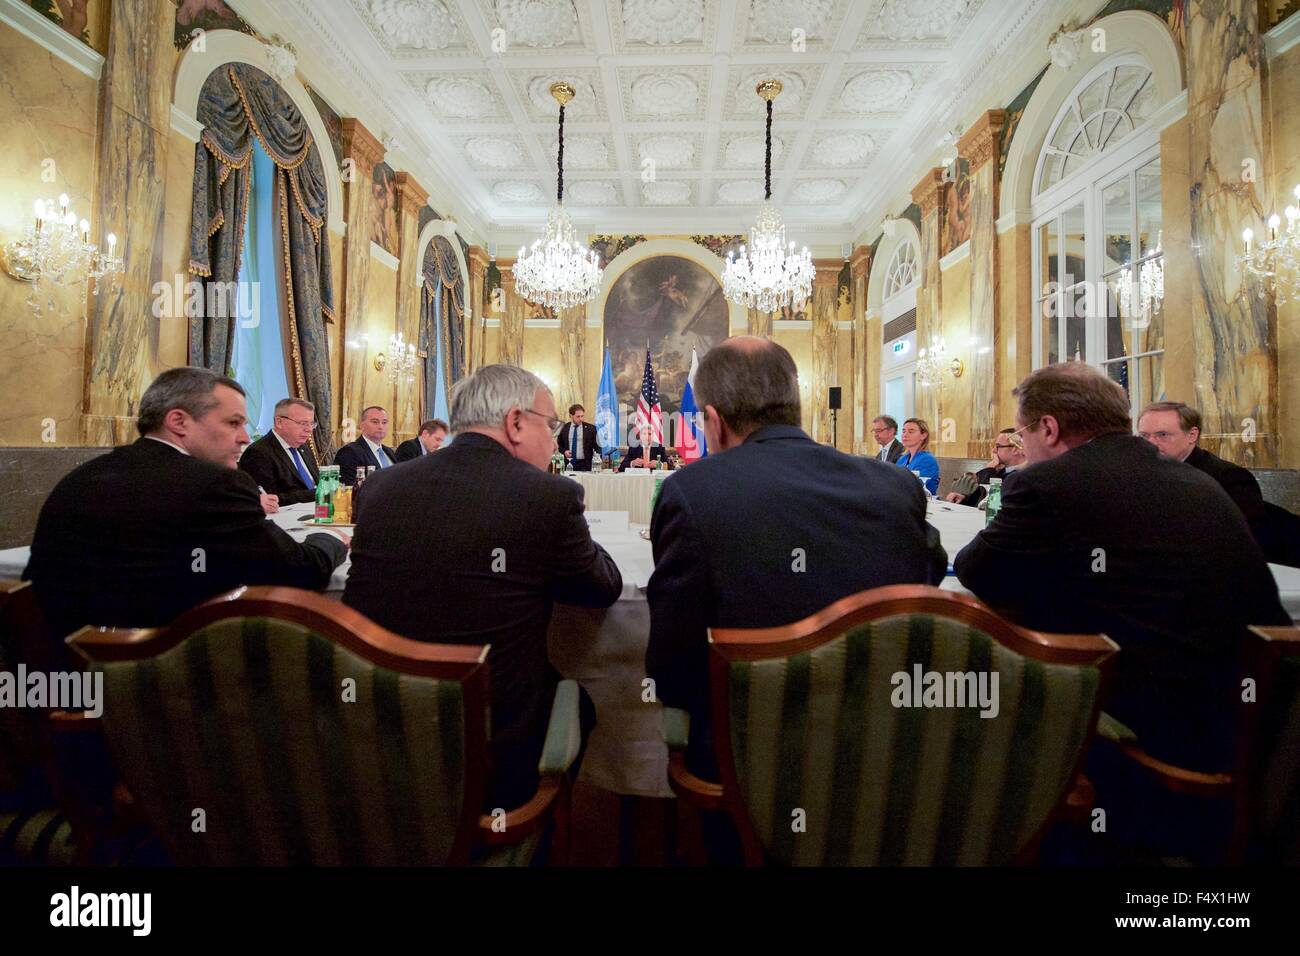 Vienna, Austria. 23rd Oct, 2015. US Secretary of State John Kerry joins Russian Foreign Minister Sergey Lavrov, European Union High Representative Federica Mogherini and other officials for a meeting focused on Syria at the Imperial Hotel October 23, 2015 in Vienna, Austria. Stock Photo